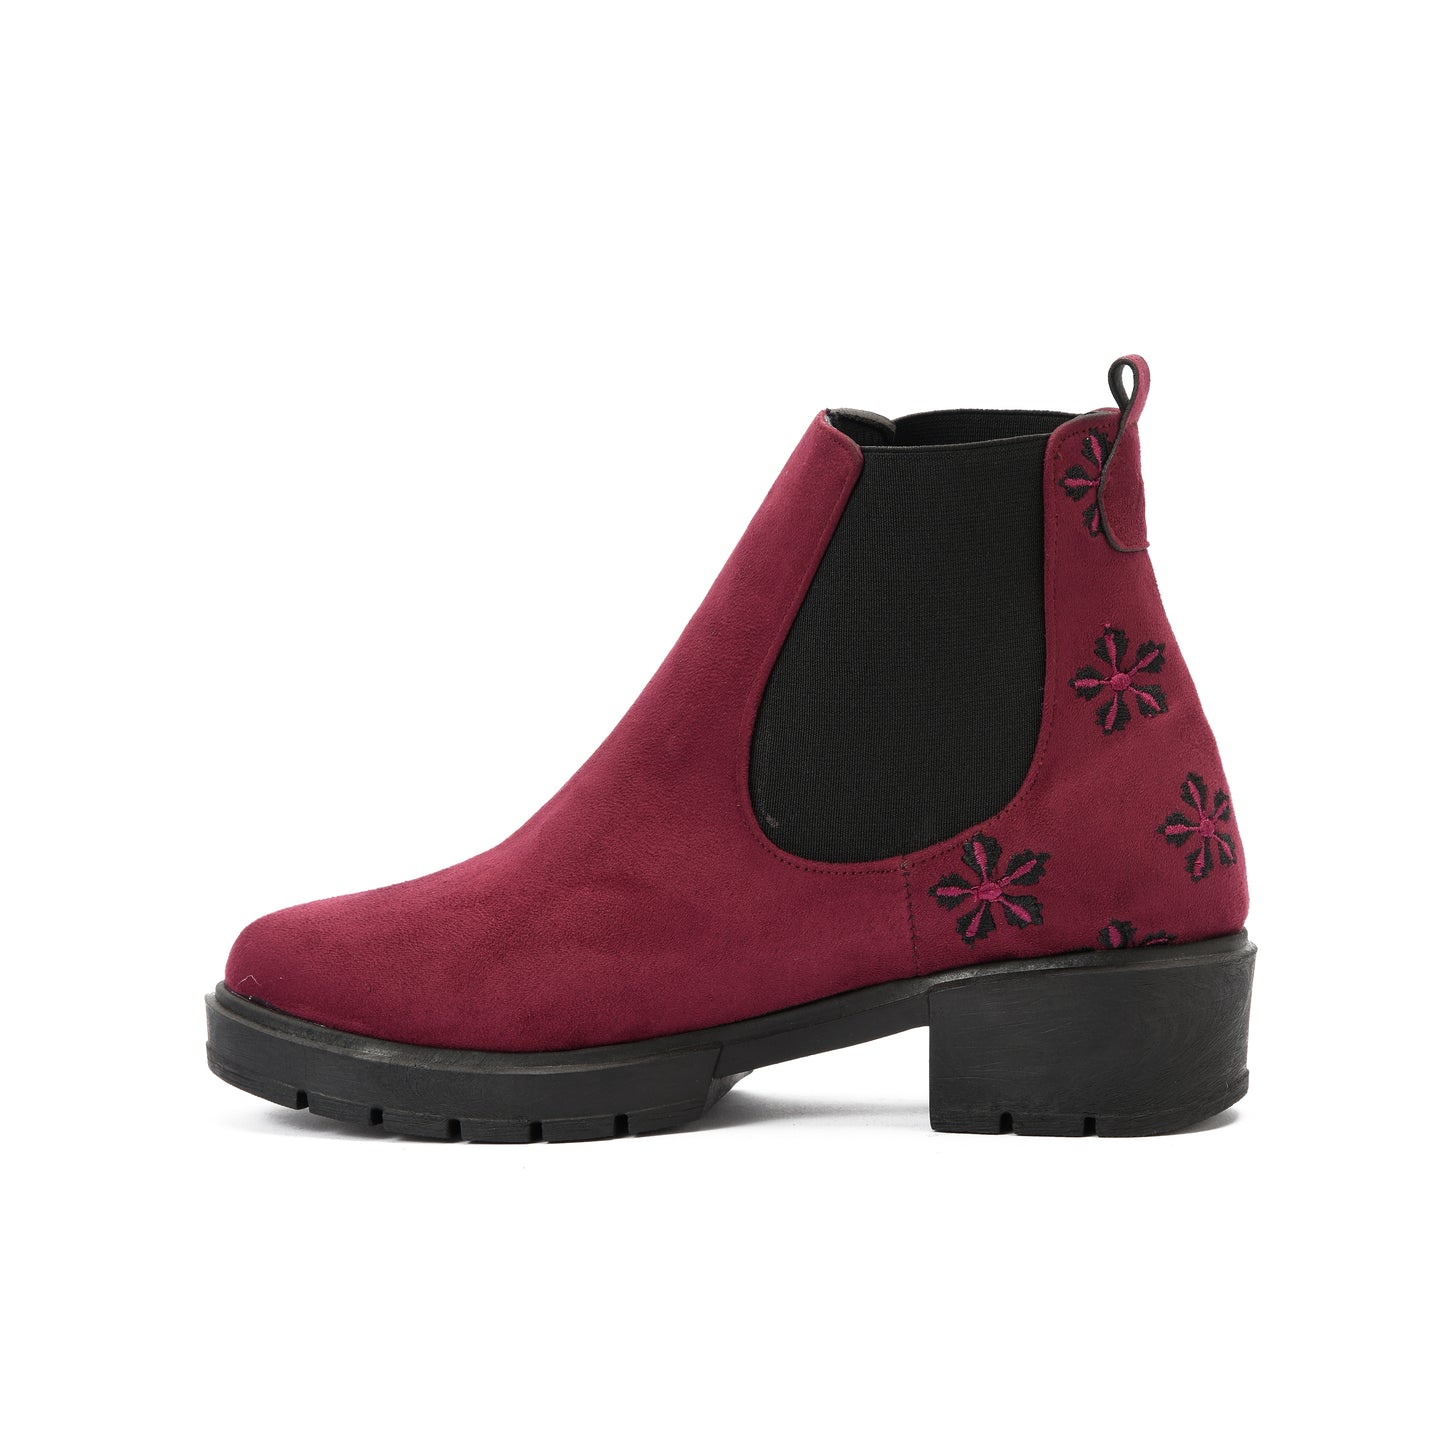 Burgundy Suede Flake Boots